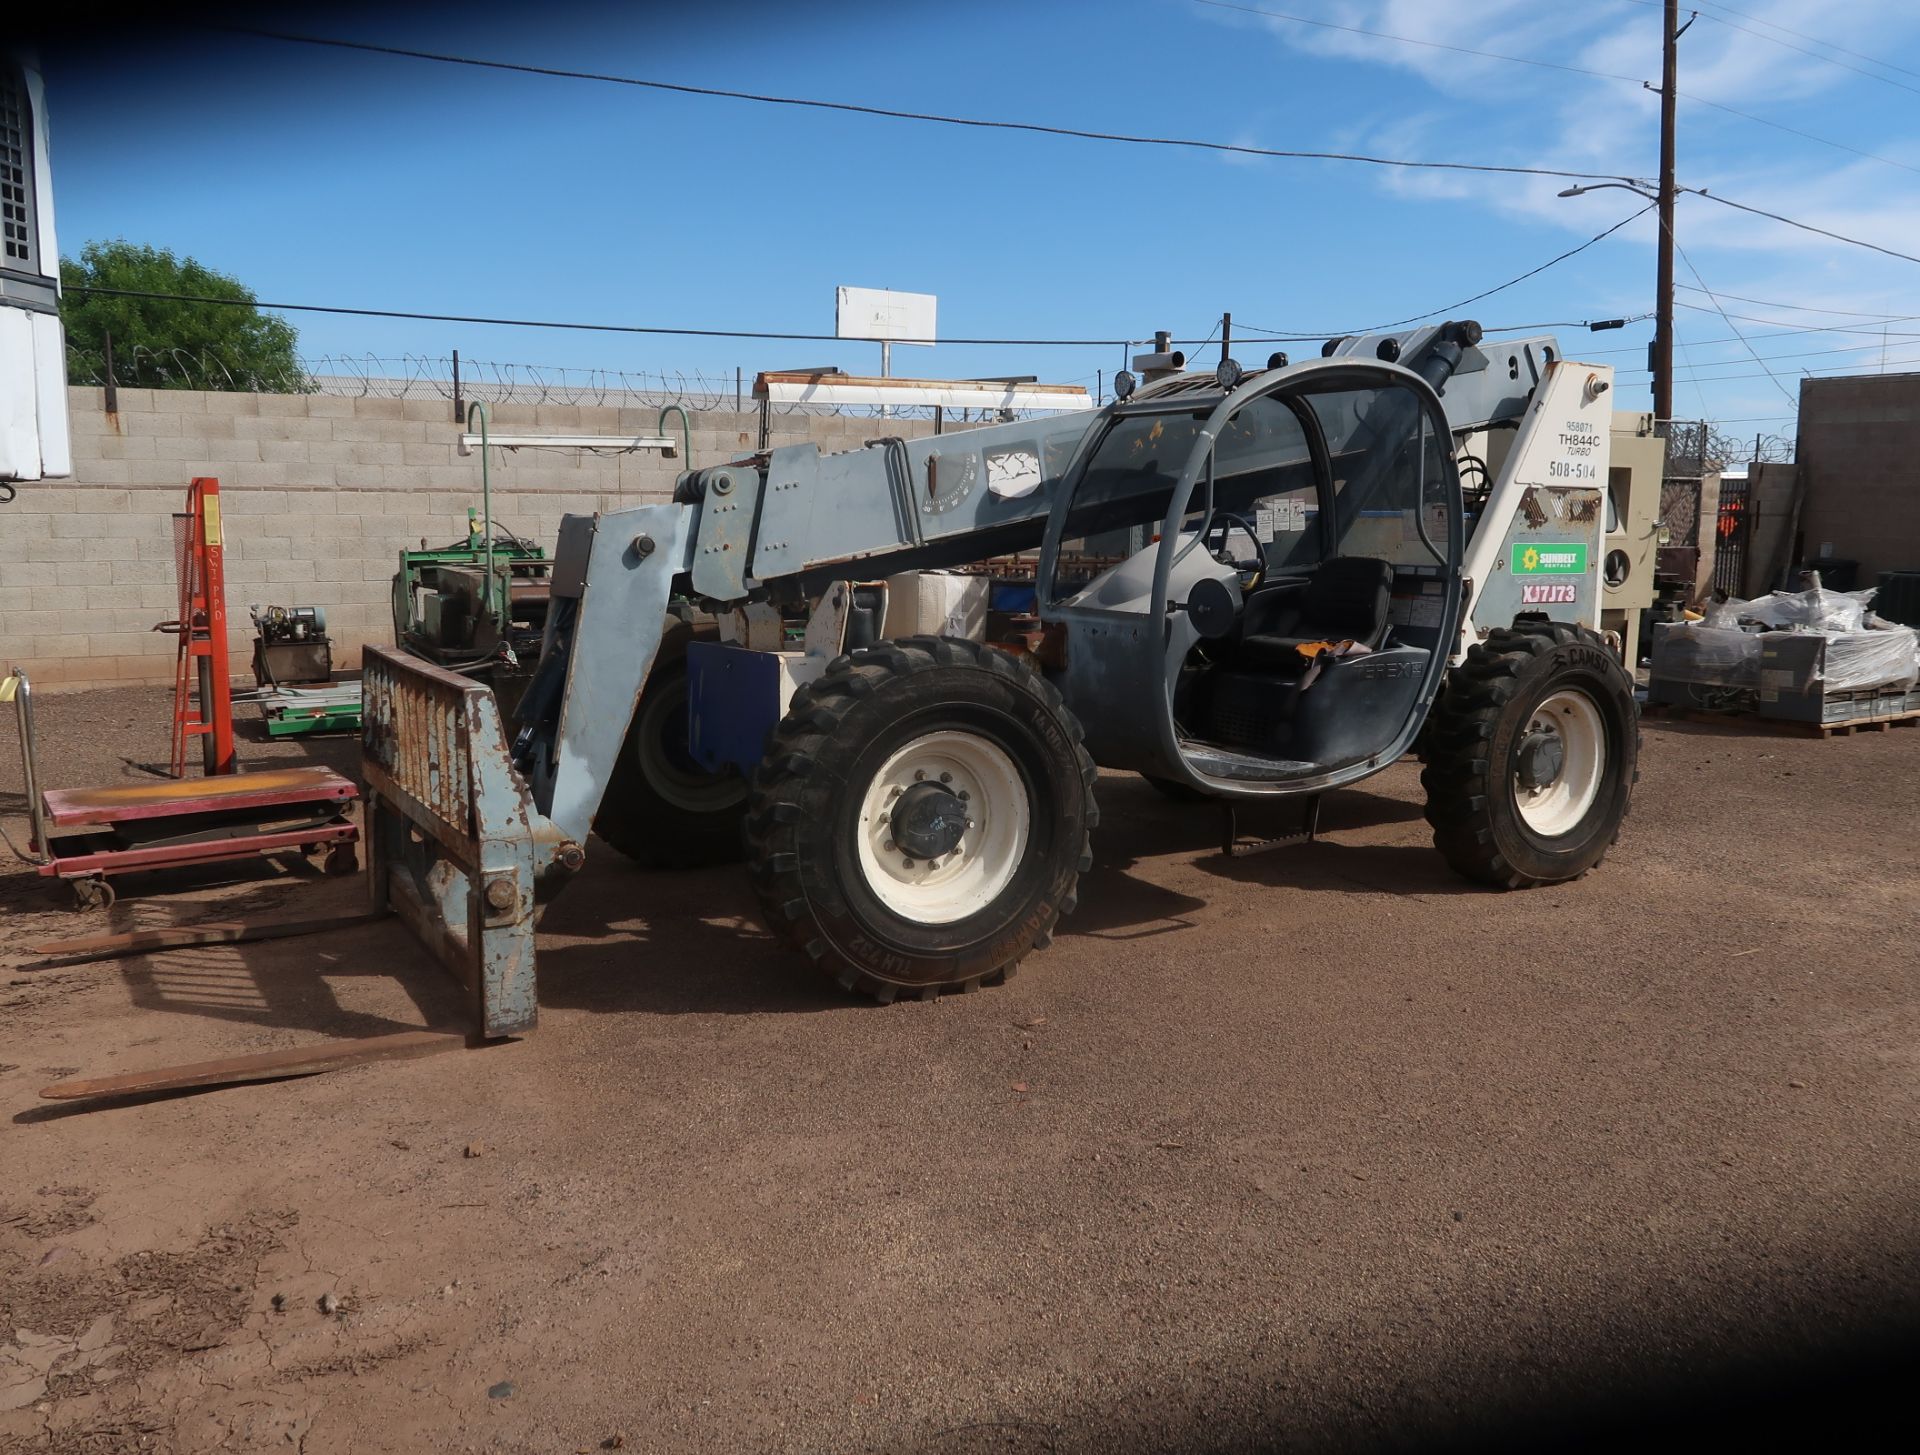 TEREX TH844C REACH LIFT 4121HRS, 4' FORKS, RUNS GREAT, NO LEAKS